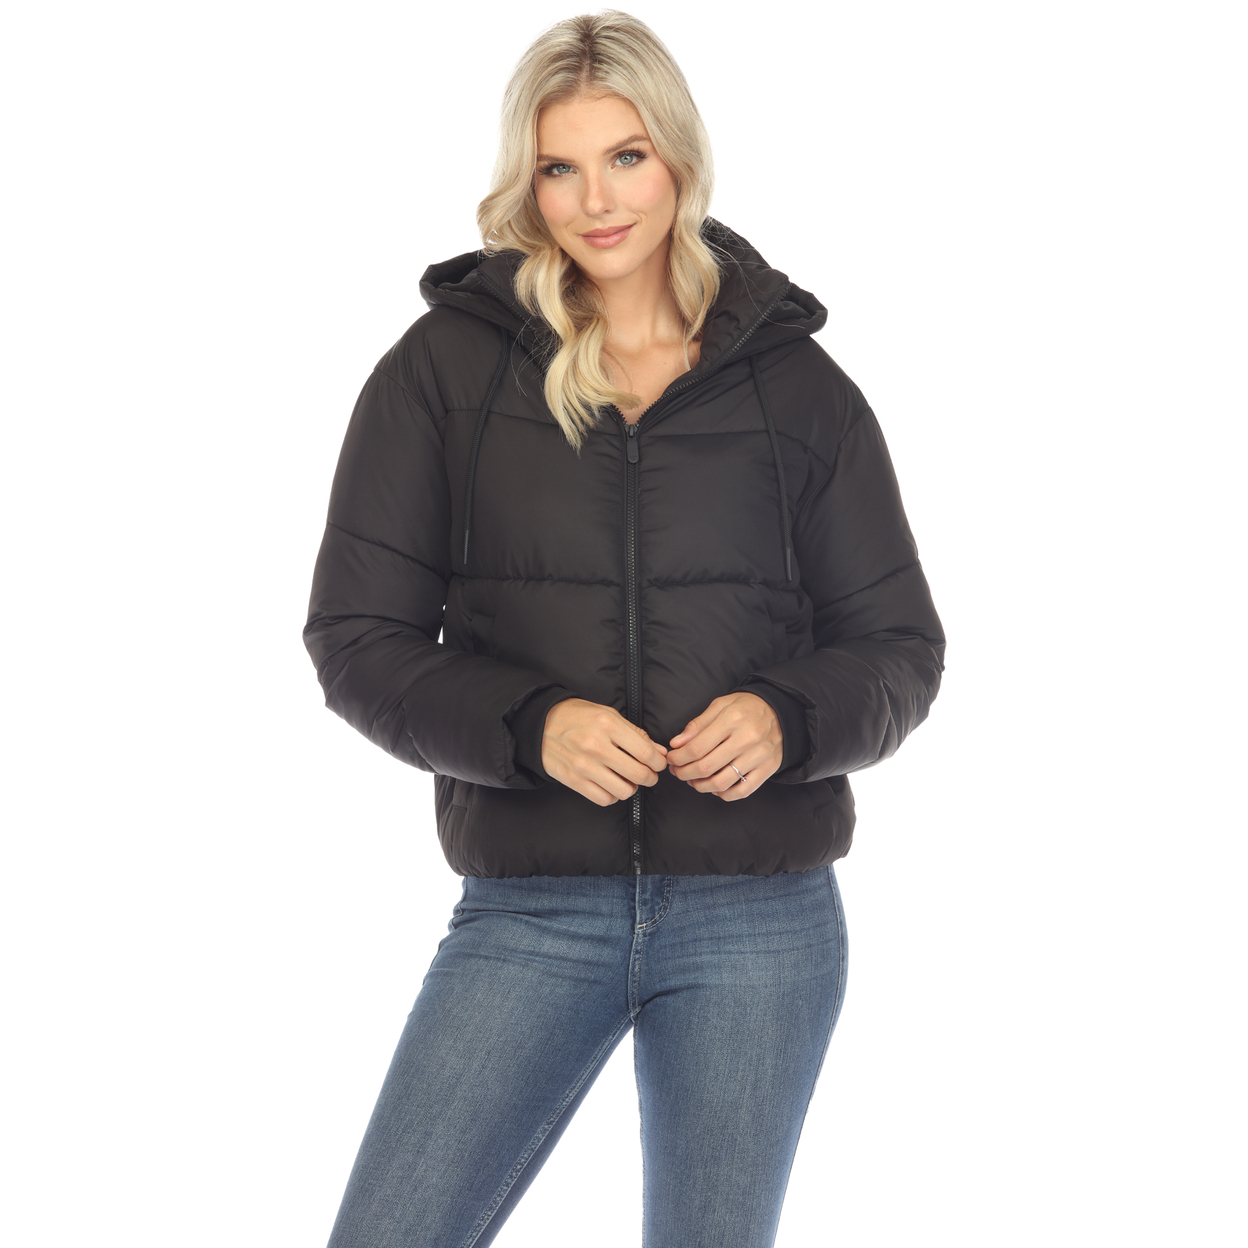 White Mark Women's Zip Hooded Puffer Jacket With Pockets - Black, Large